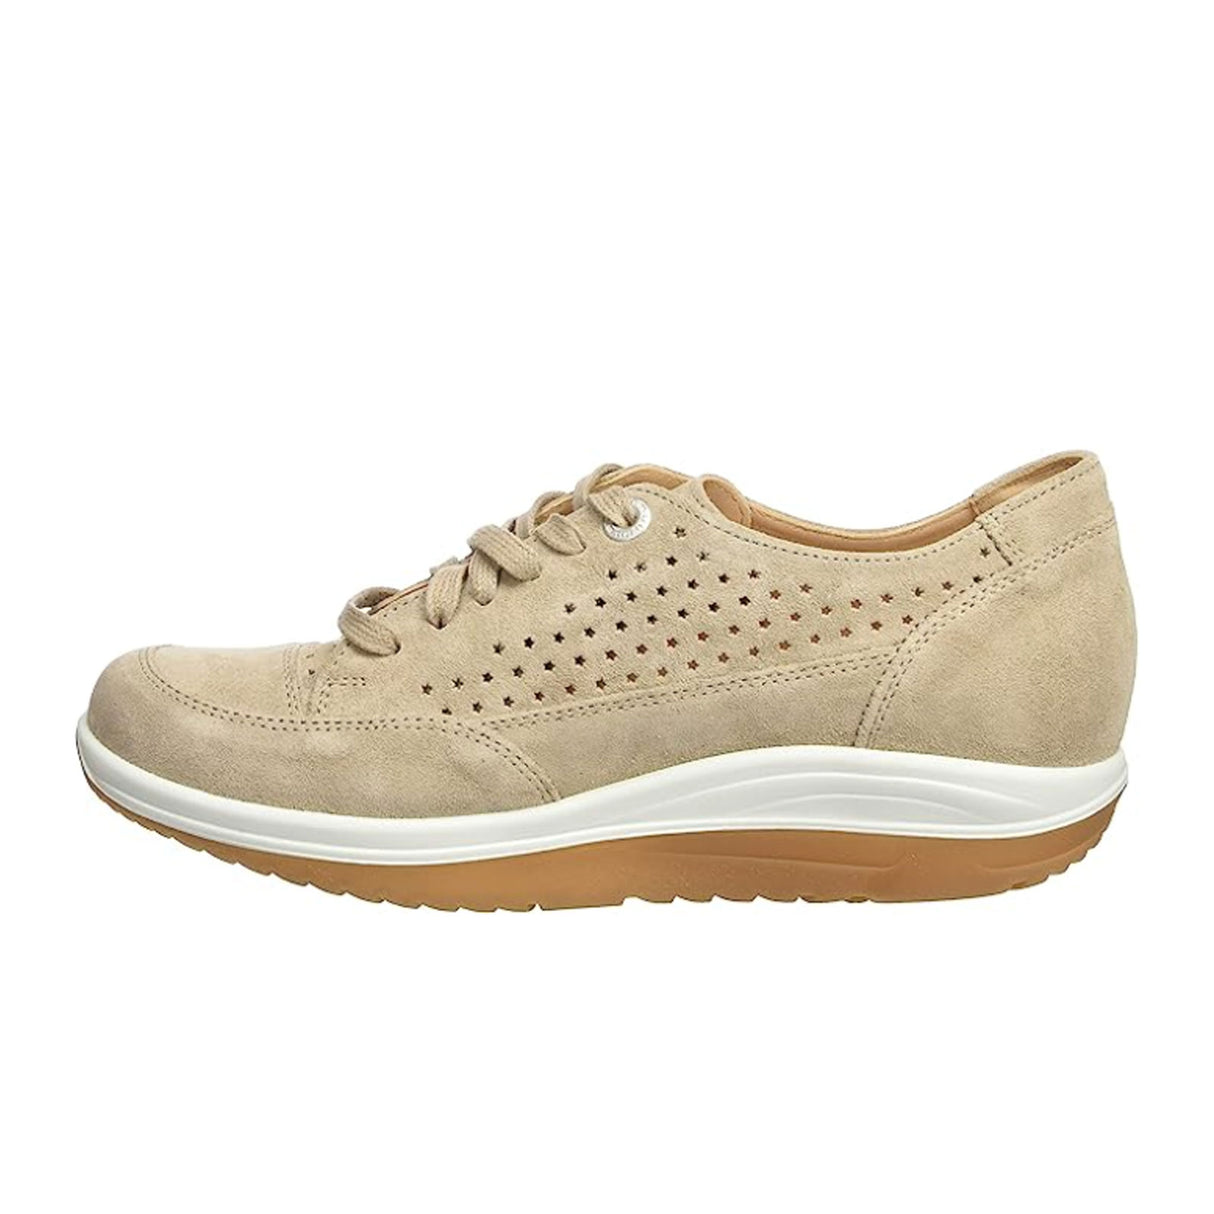 Ganter Gisa 6 Active Sneaker (Women) - Taupe Dress-Casual - Sneakers - The Heel Shoe Fitters